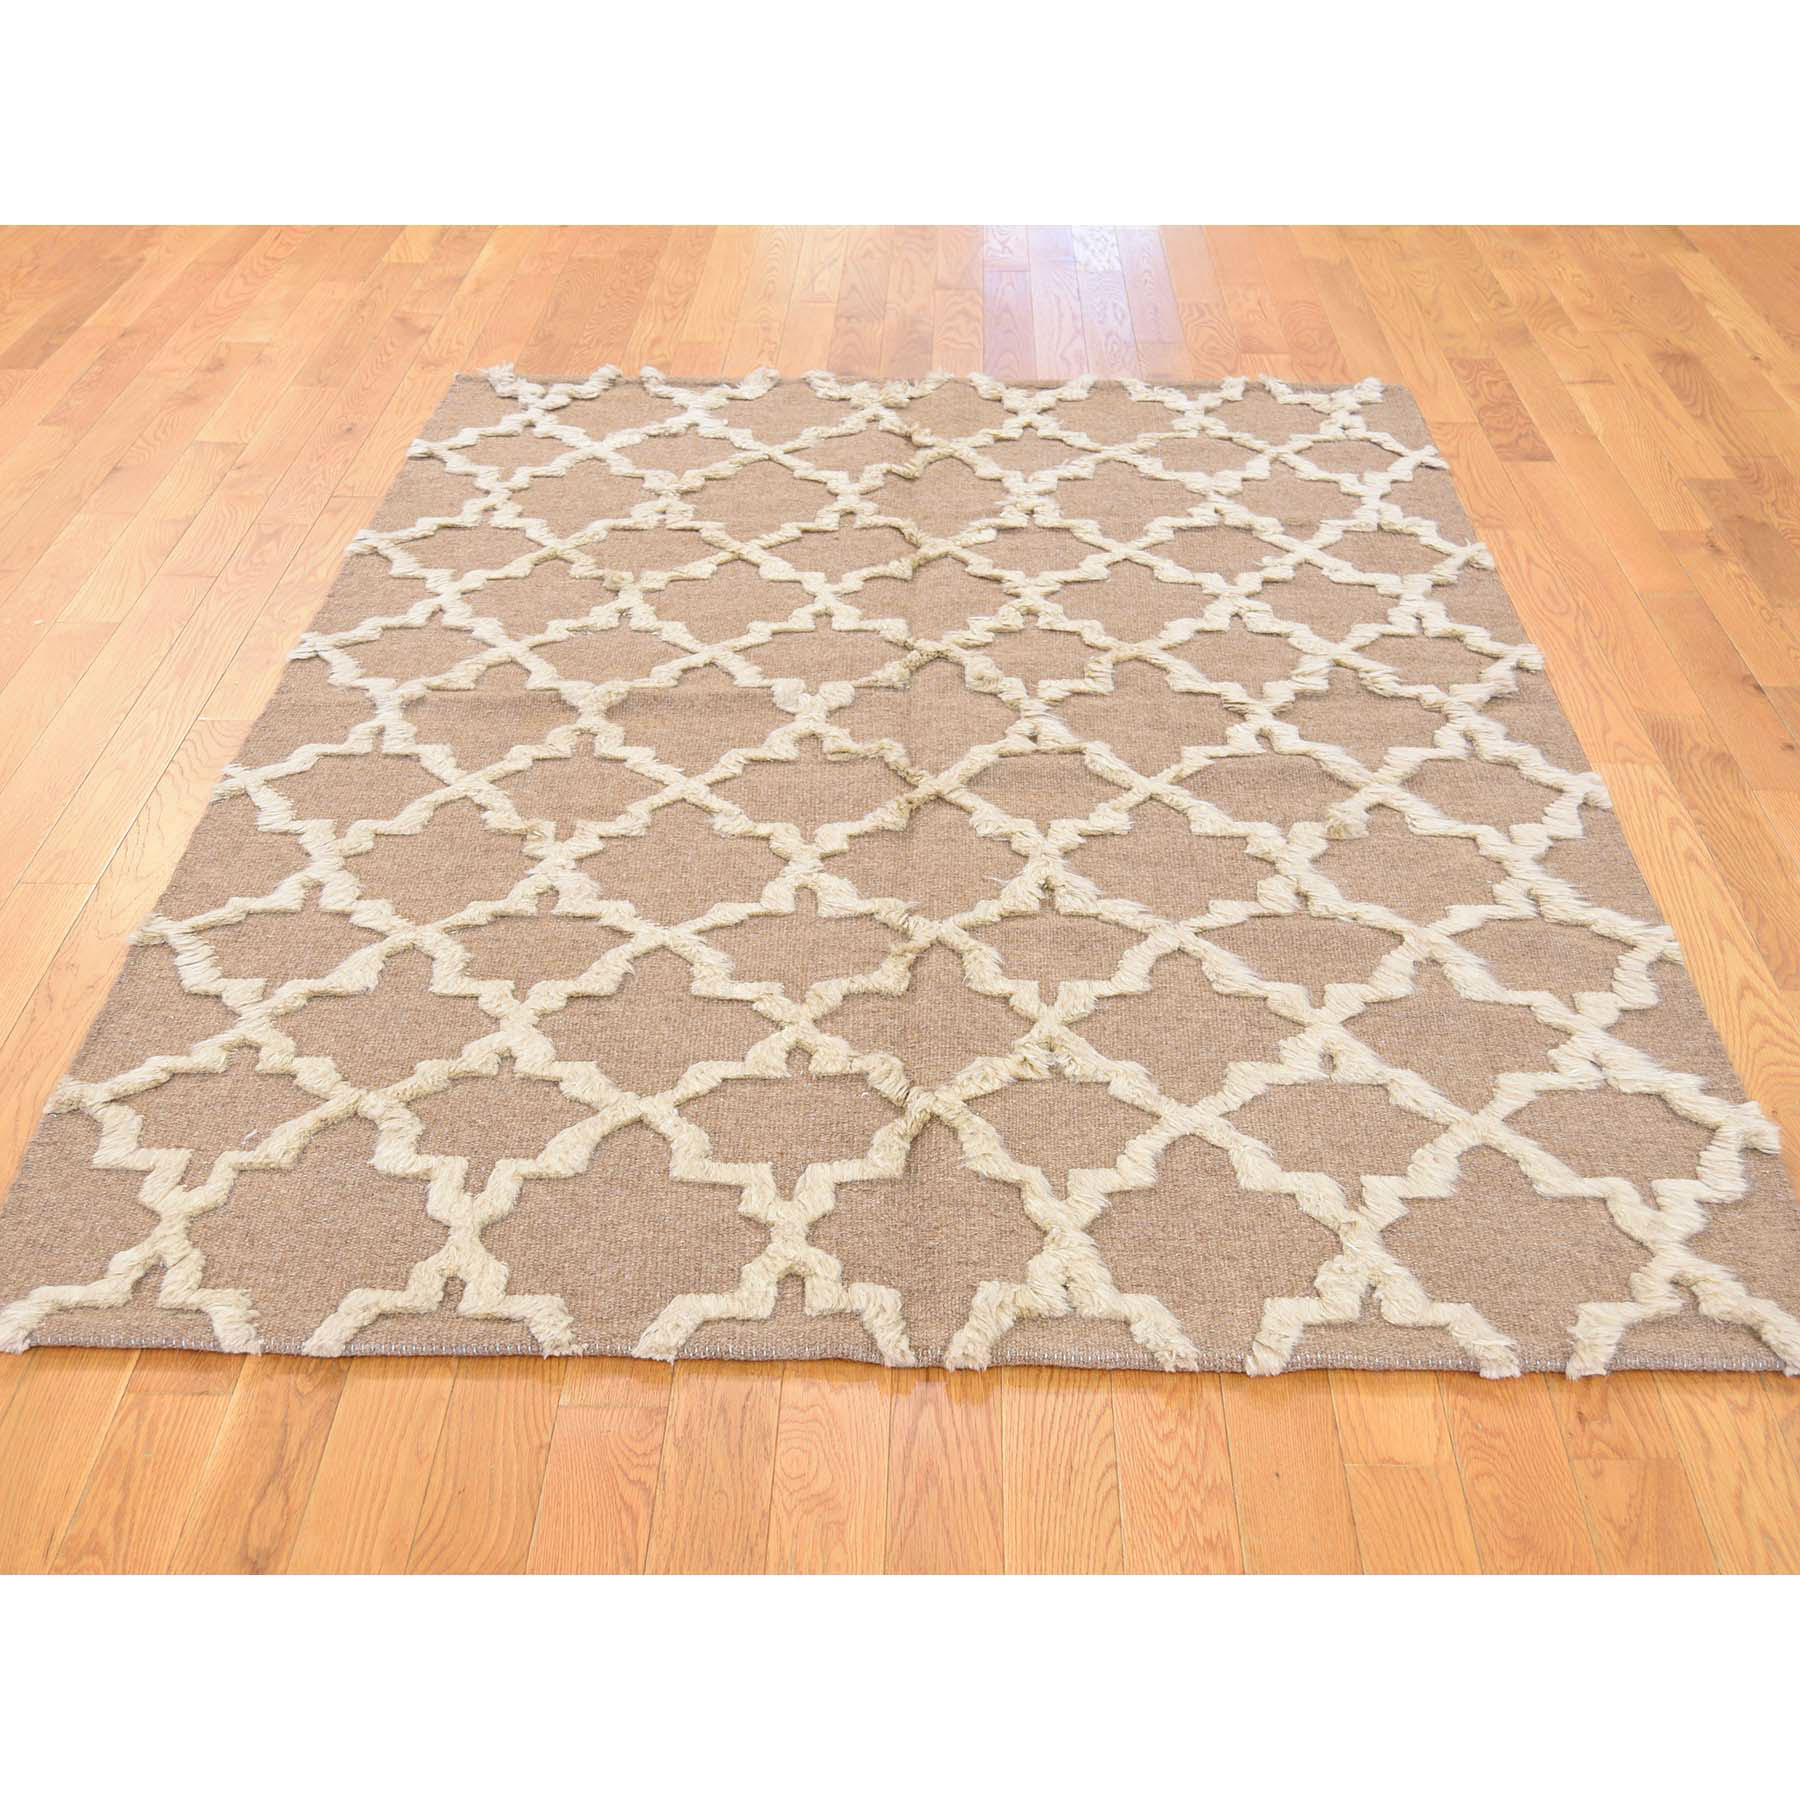 5-x7- Pure Wool Hand-Knotted Moroccan Geometric Design Oriental Rug 